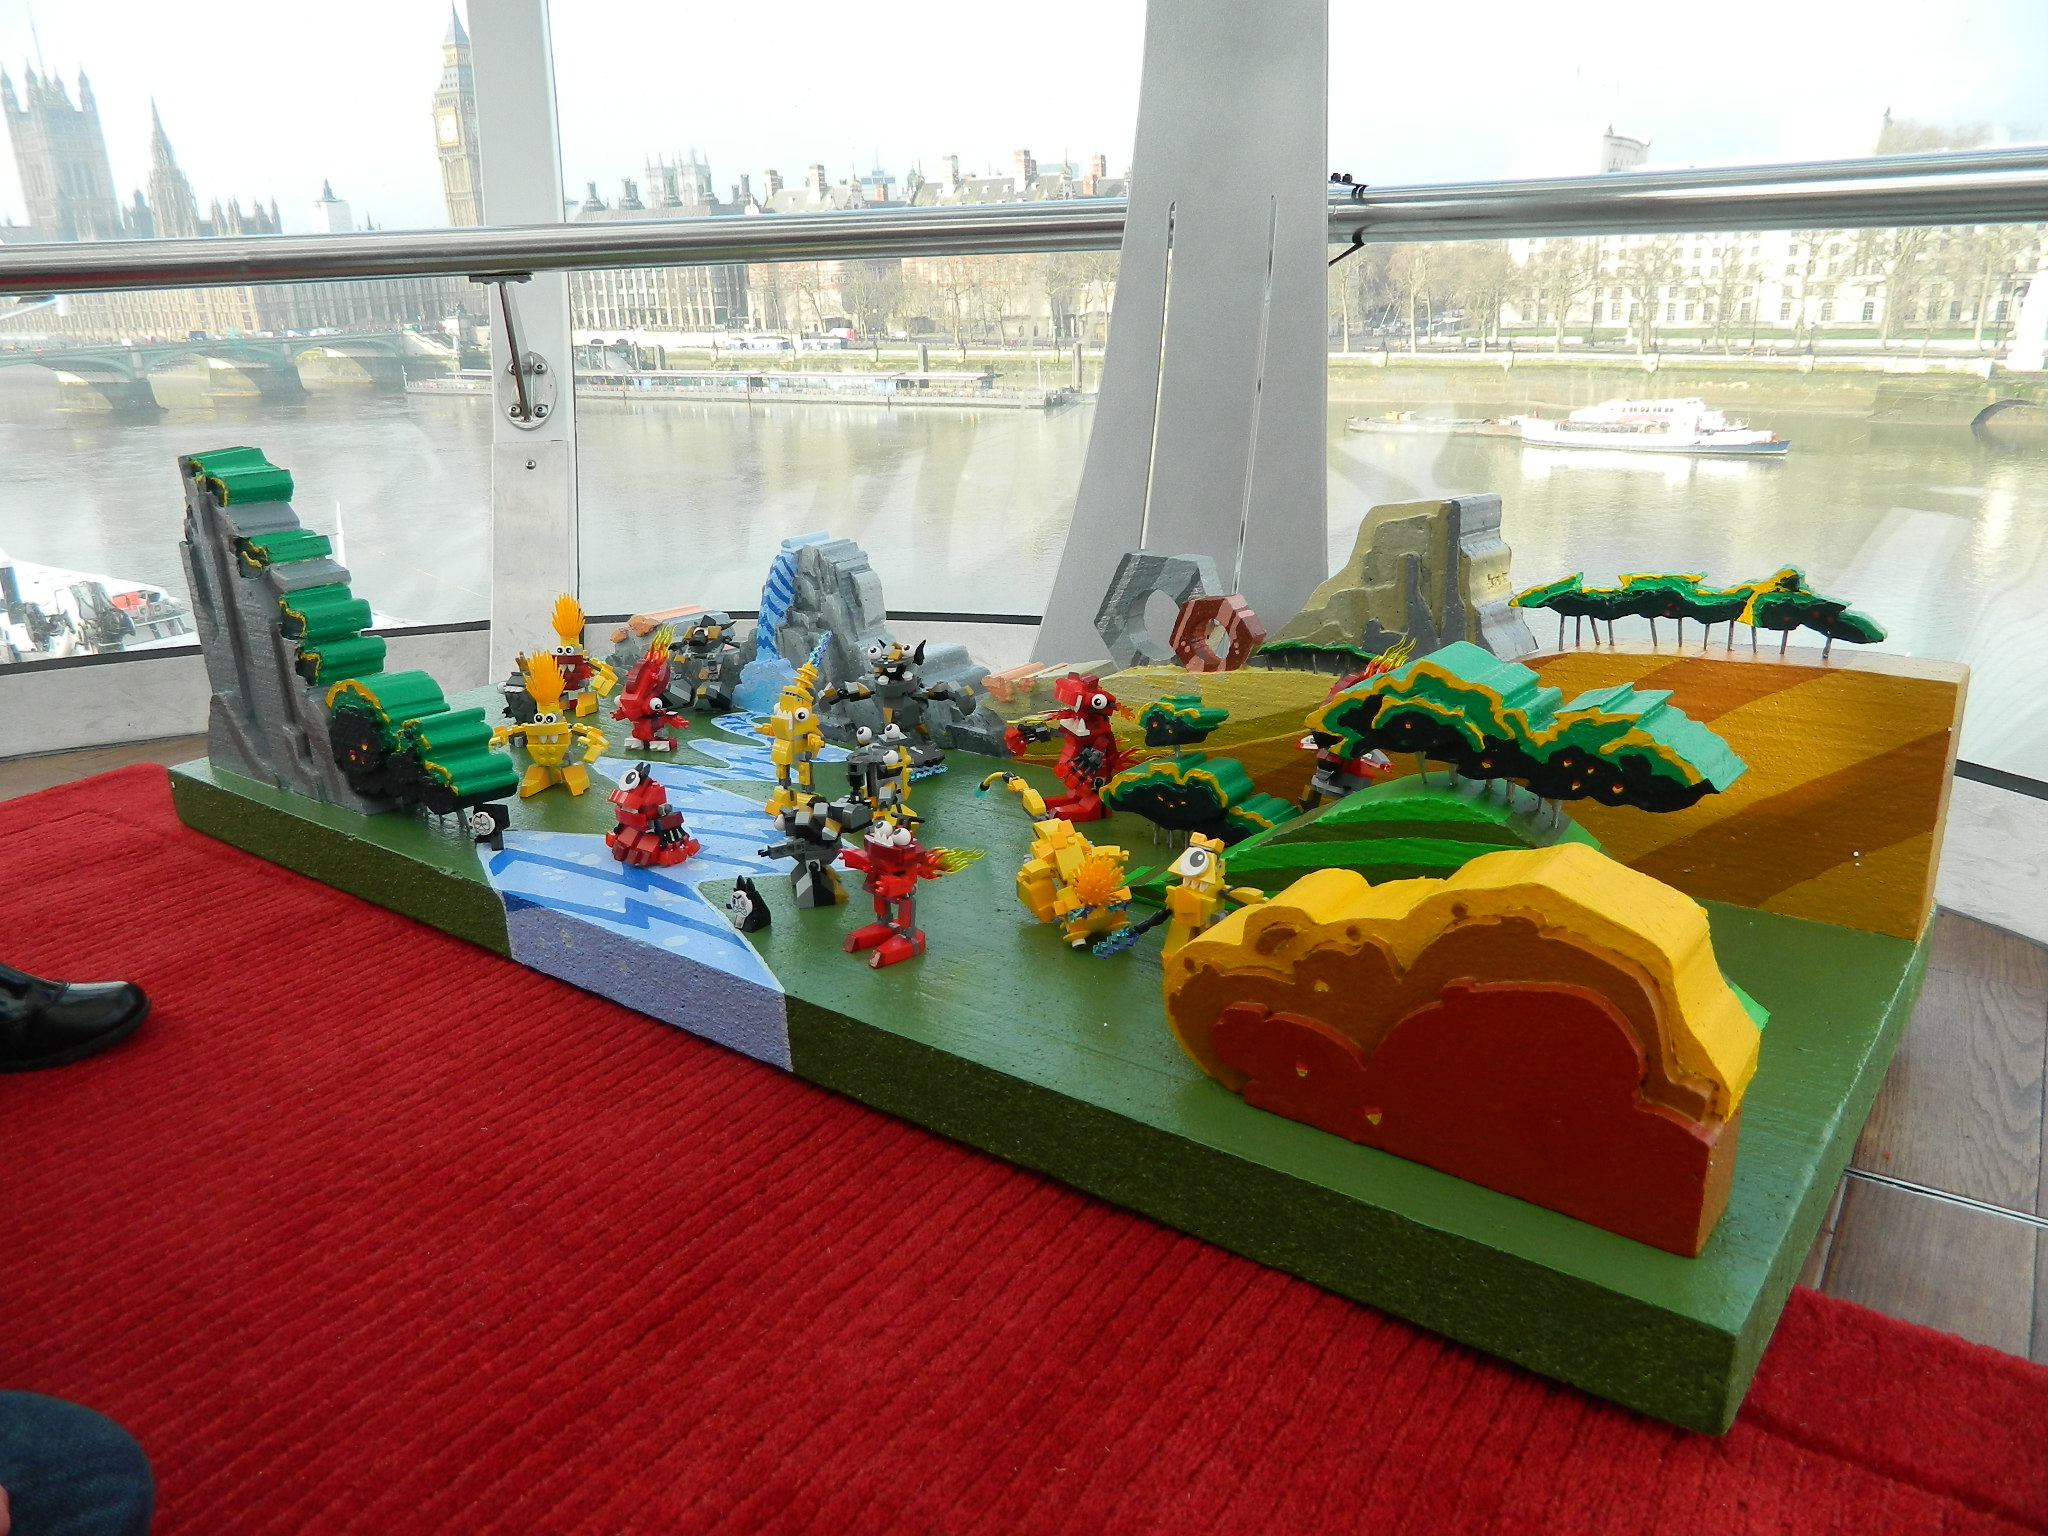 LEGO: MIXELS – London Eye Press event with Hag, Con and Bex2048 x 1536